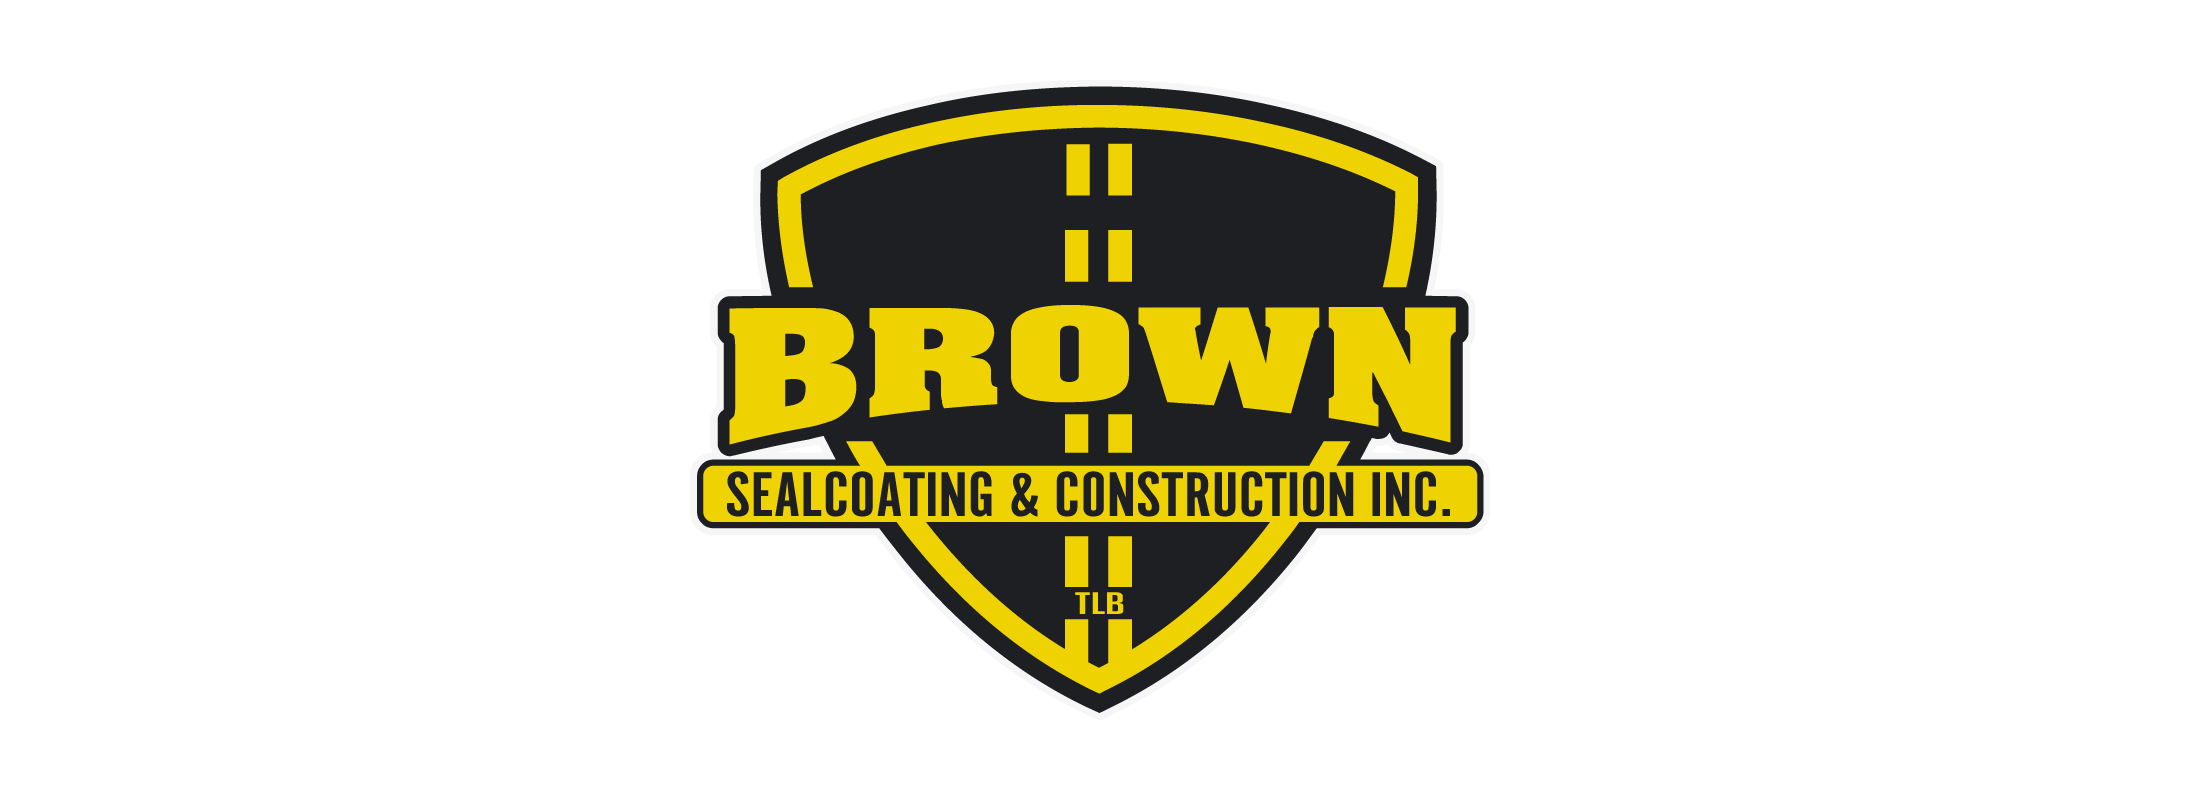 Sealcoating Logo - Brown Sealcoating & Construction Inc. Commercial and Residential